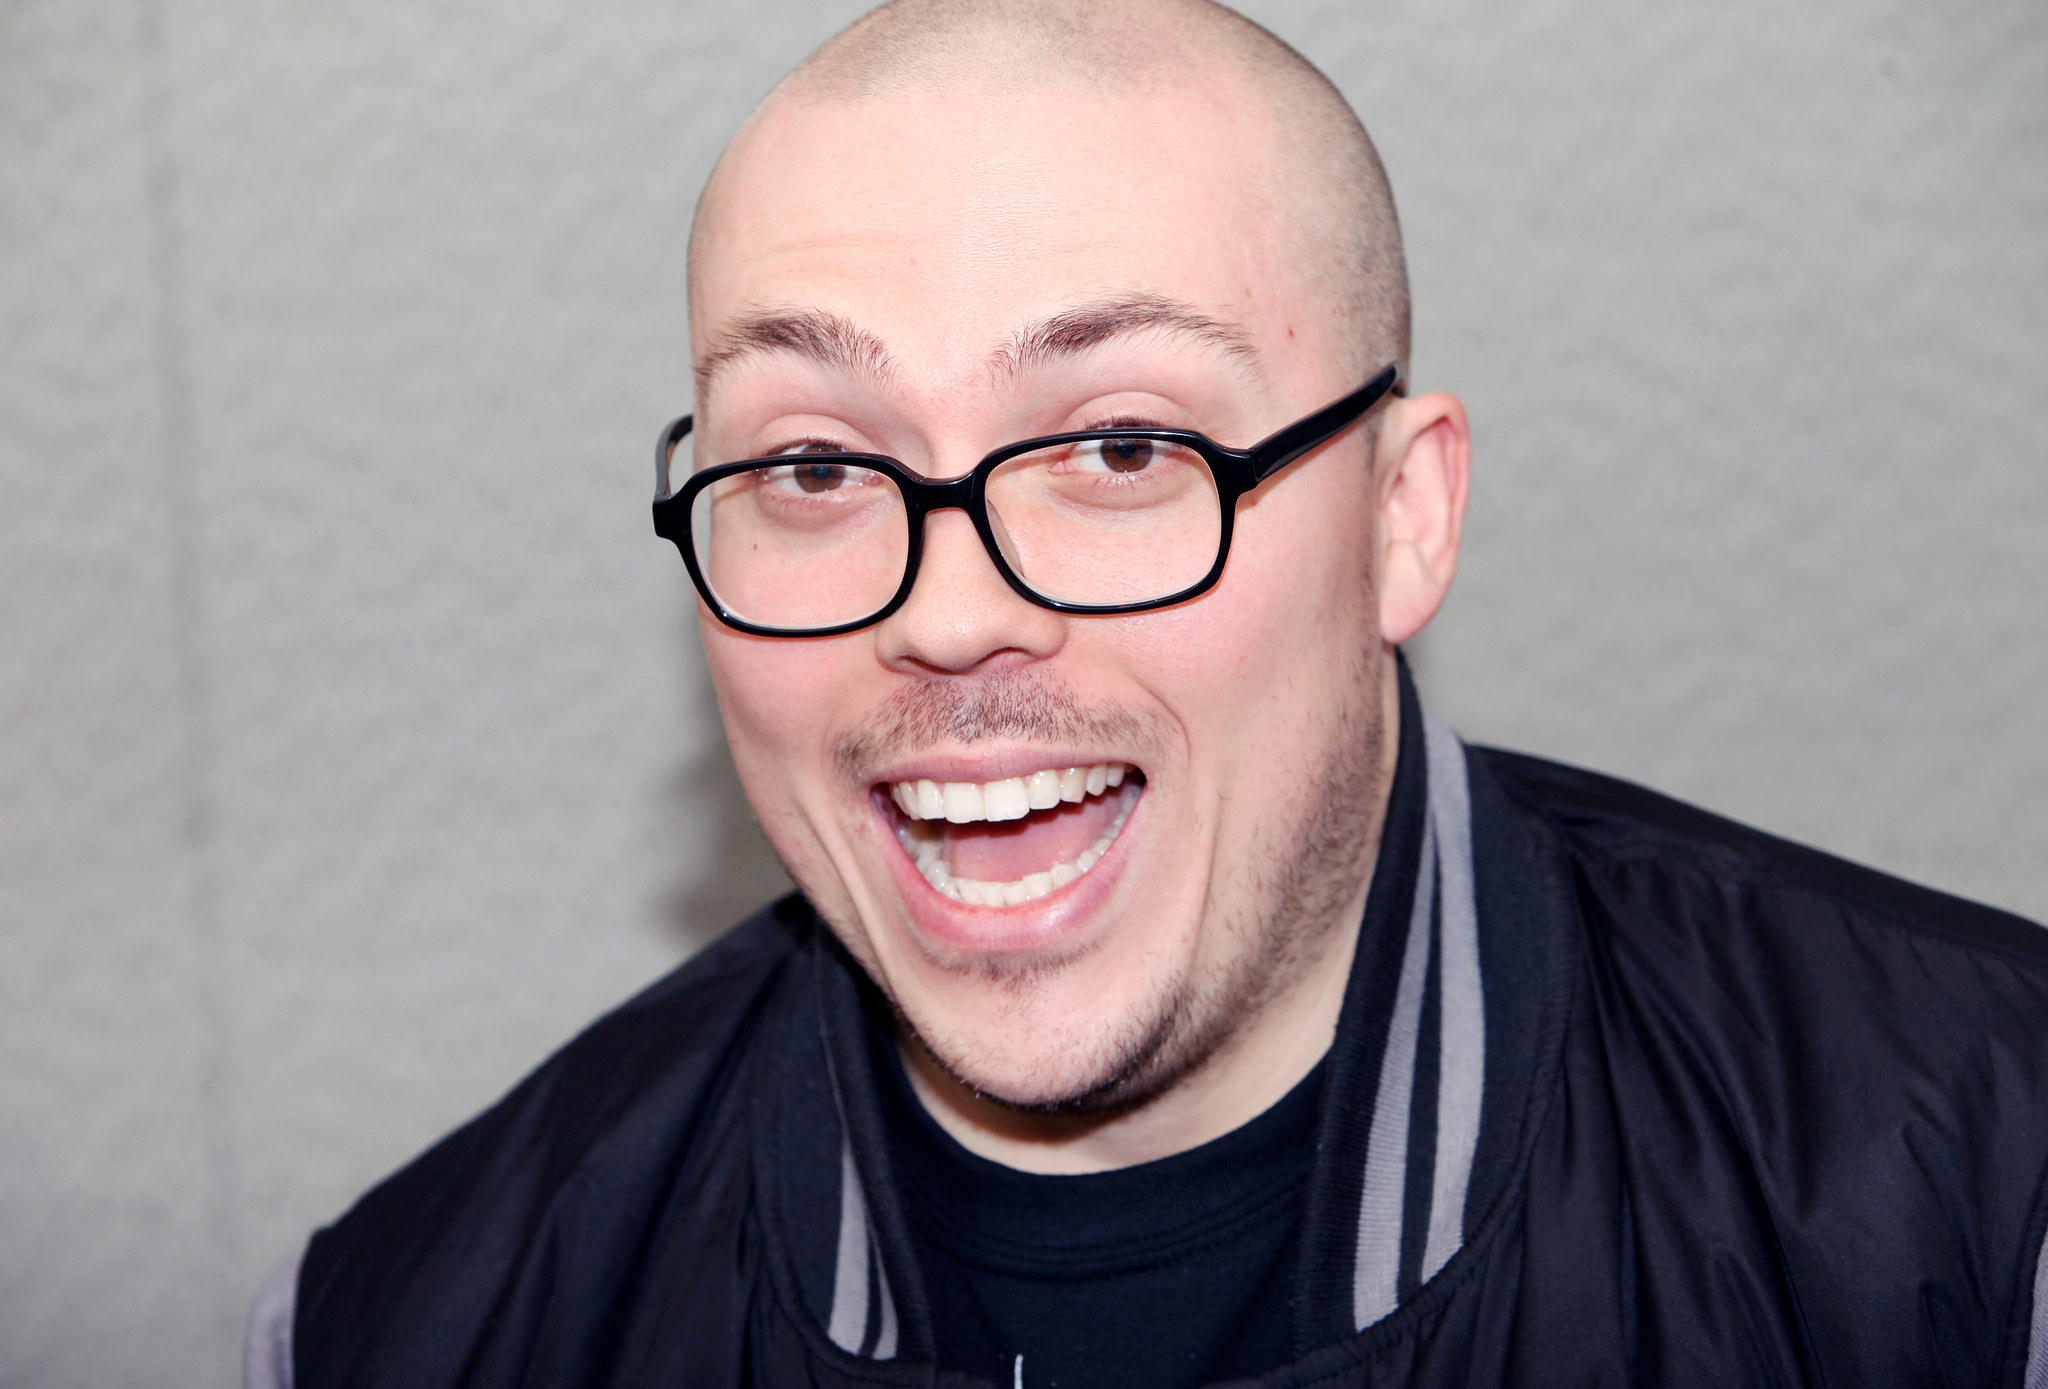 Anthony Fantano Divorce From Wife Dominique Boxley - All You Need To Know 